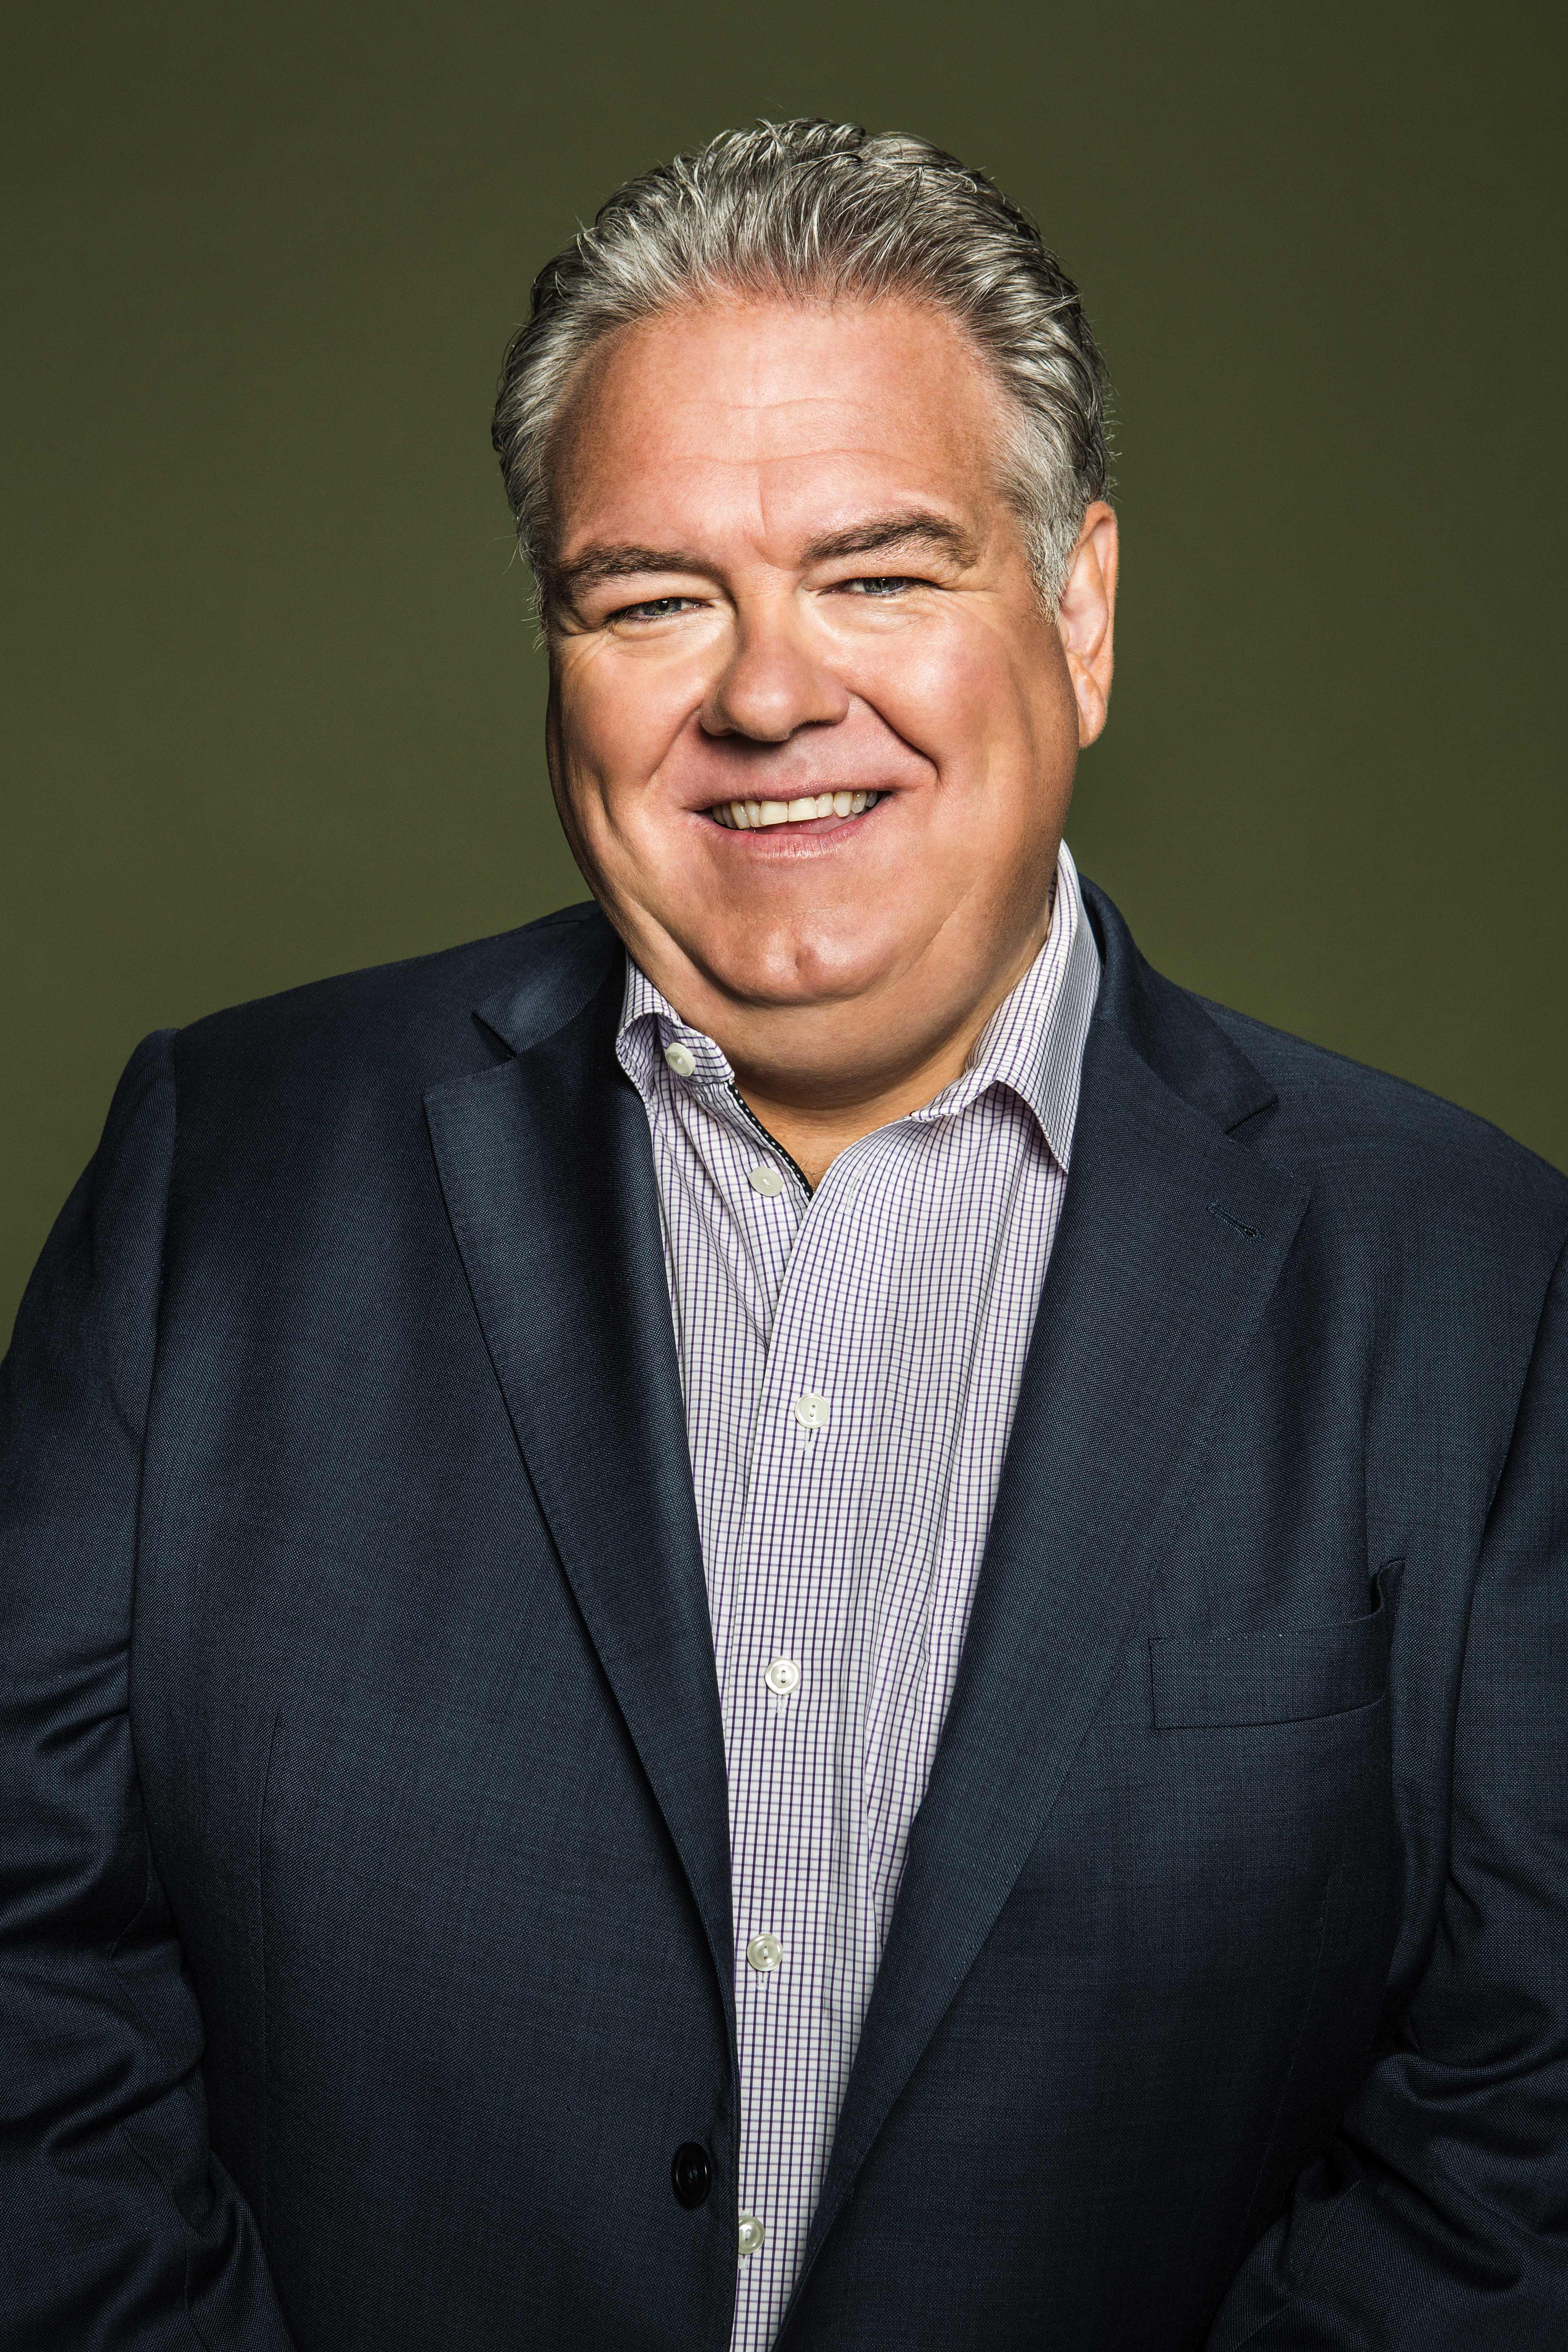 The Middle Man: Jim O’Heir Talks Emmy Win, Homelessness in Chicago and LA, Upcoming Film